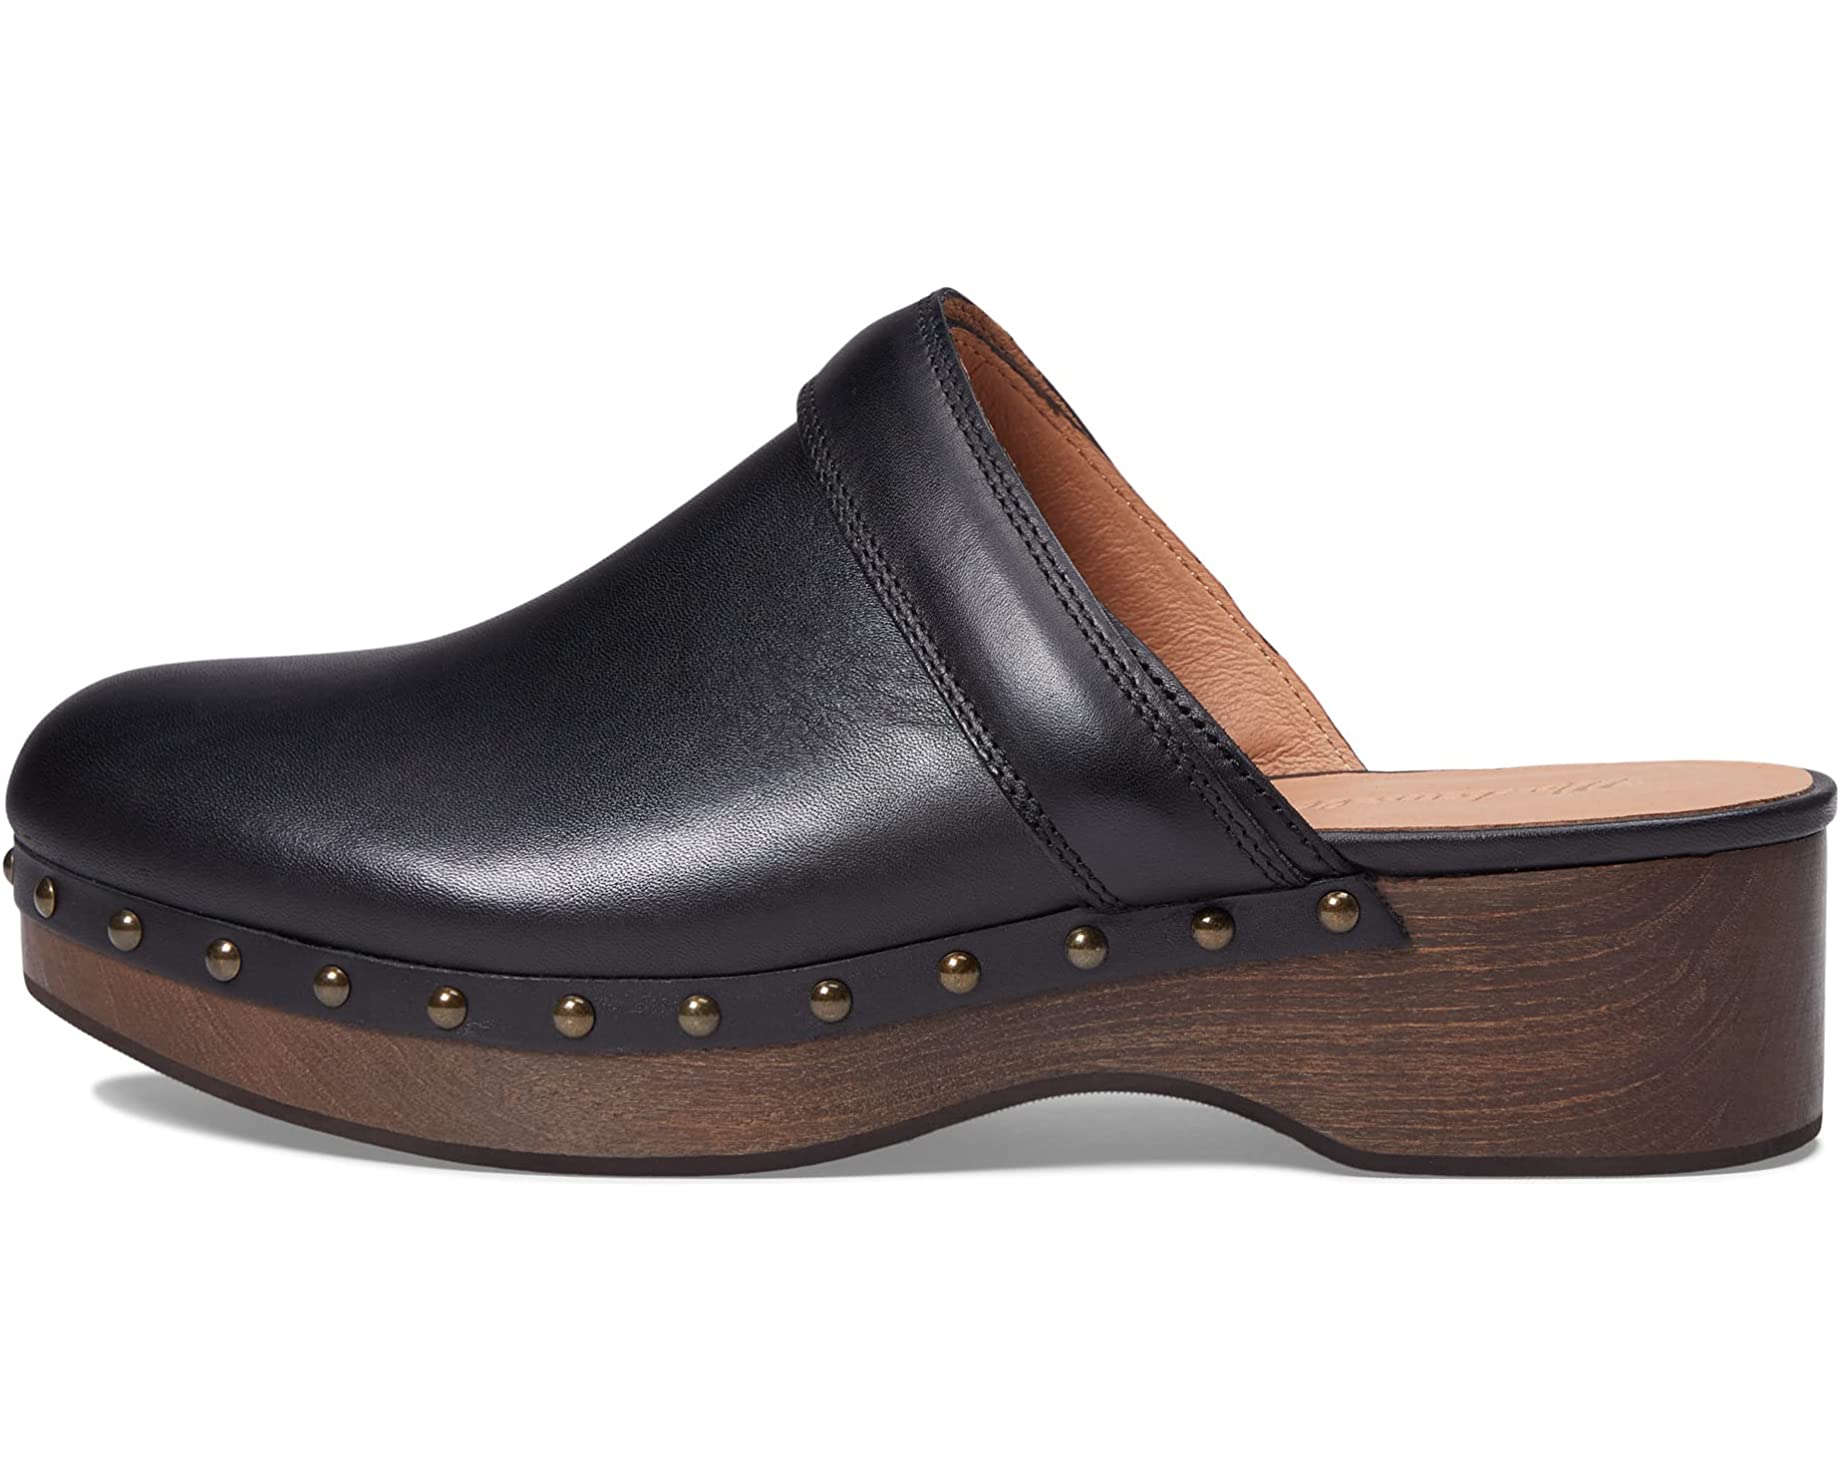 garthwaite annie cecily Сабо The Cecily Clog in Oiled Leather Madewell, черный